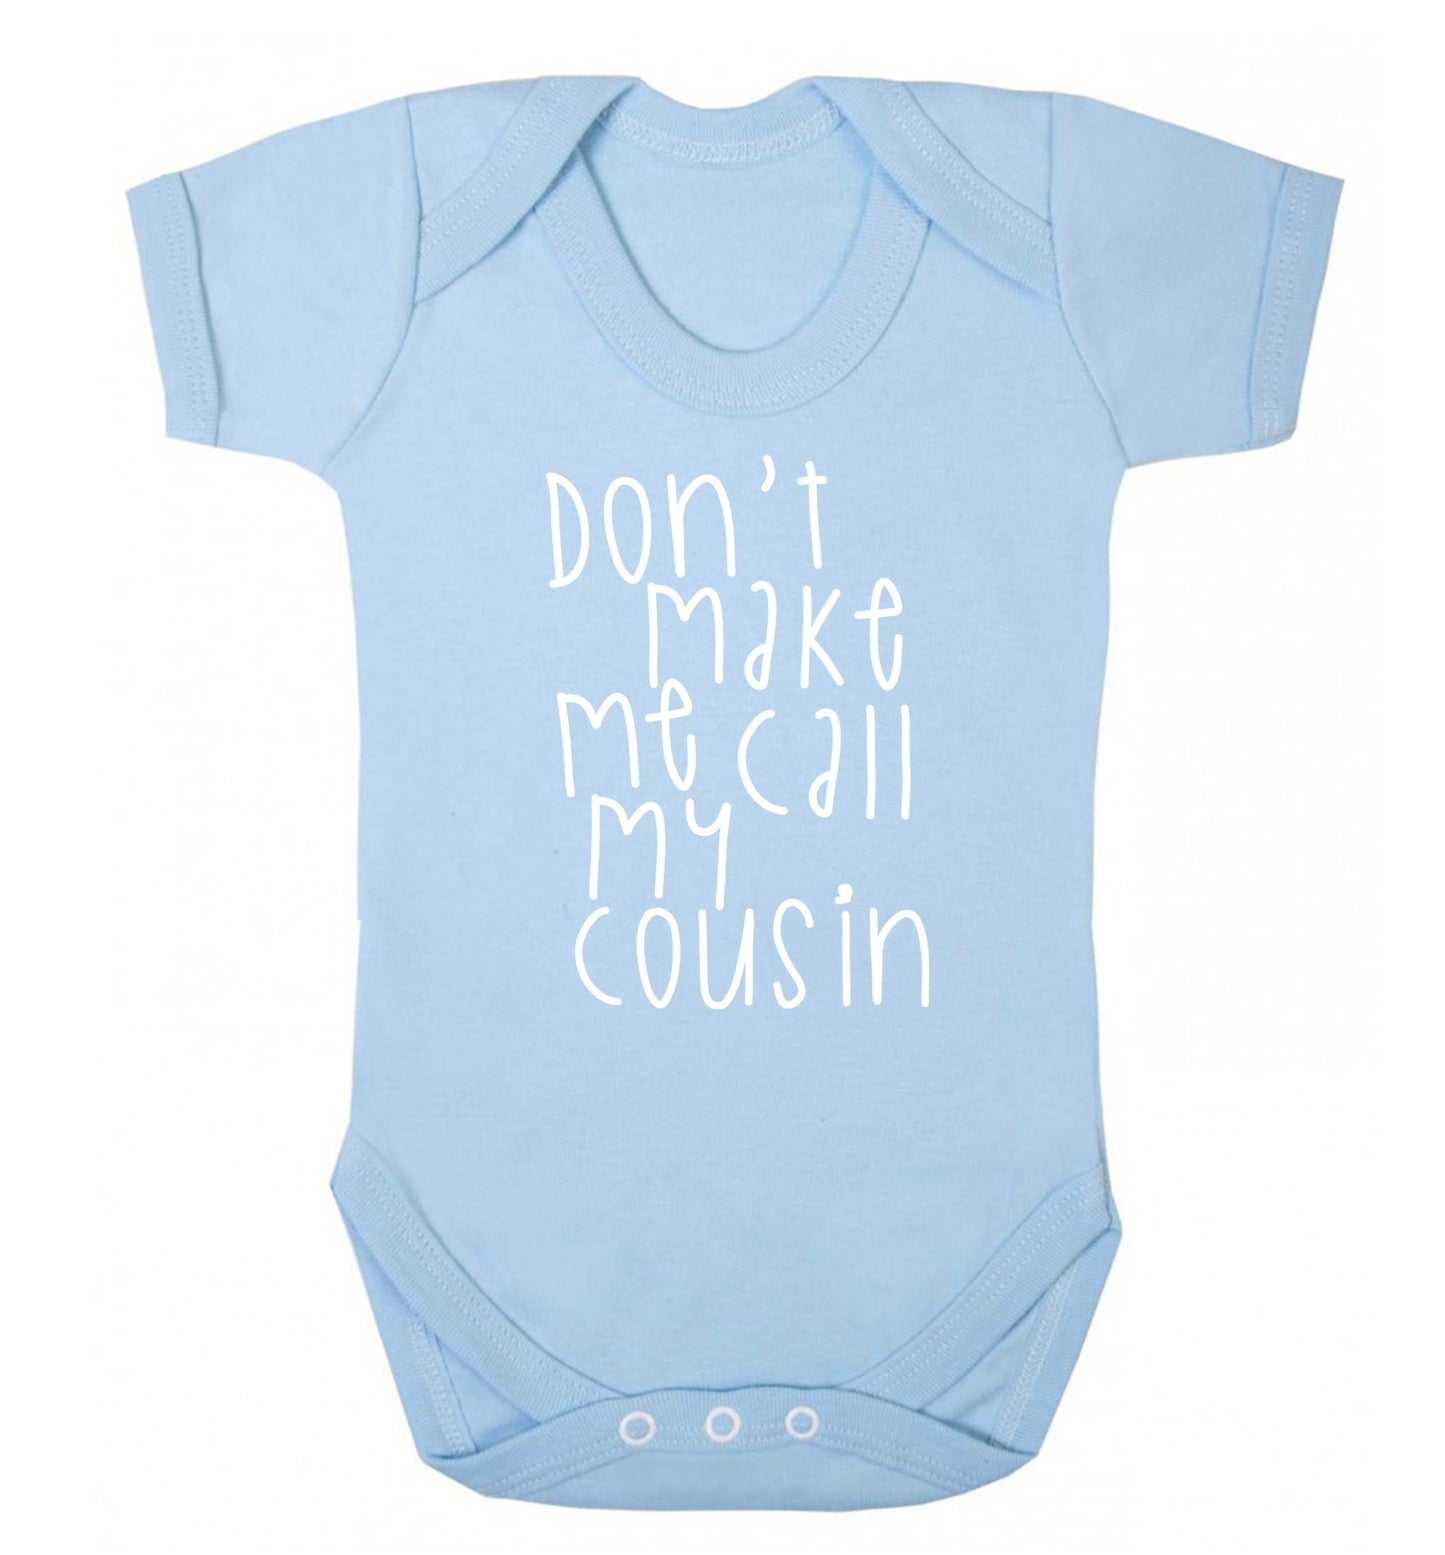 Don't make me call my cousin Baby Vest pale blue 18-24 months